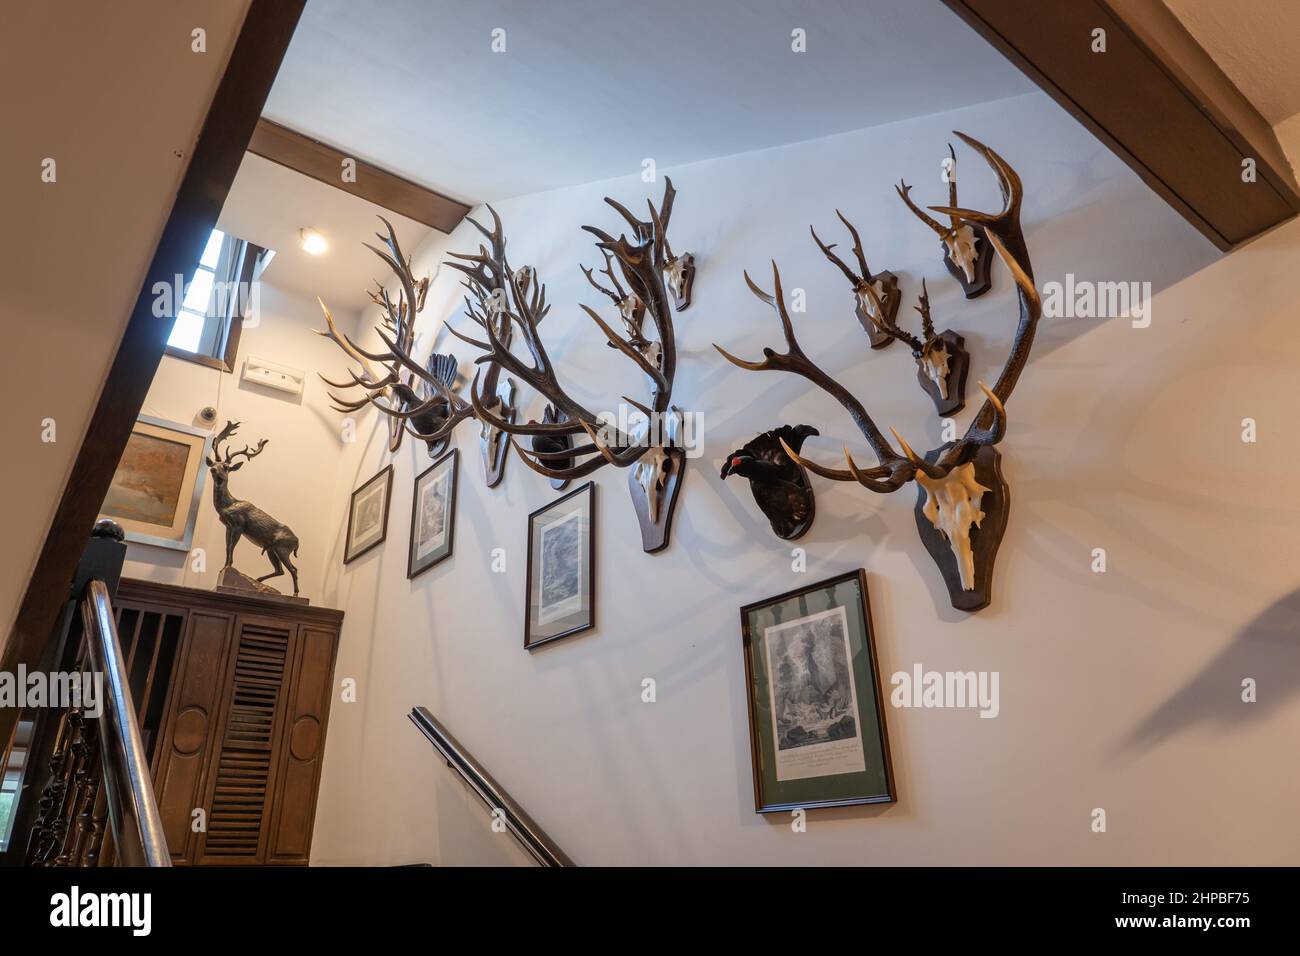 Antlers on staircase wall in Museum of Hunting and Horsemanship in Royal Lazienki Park in Warsaw, Poland. Stock Photo